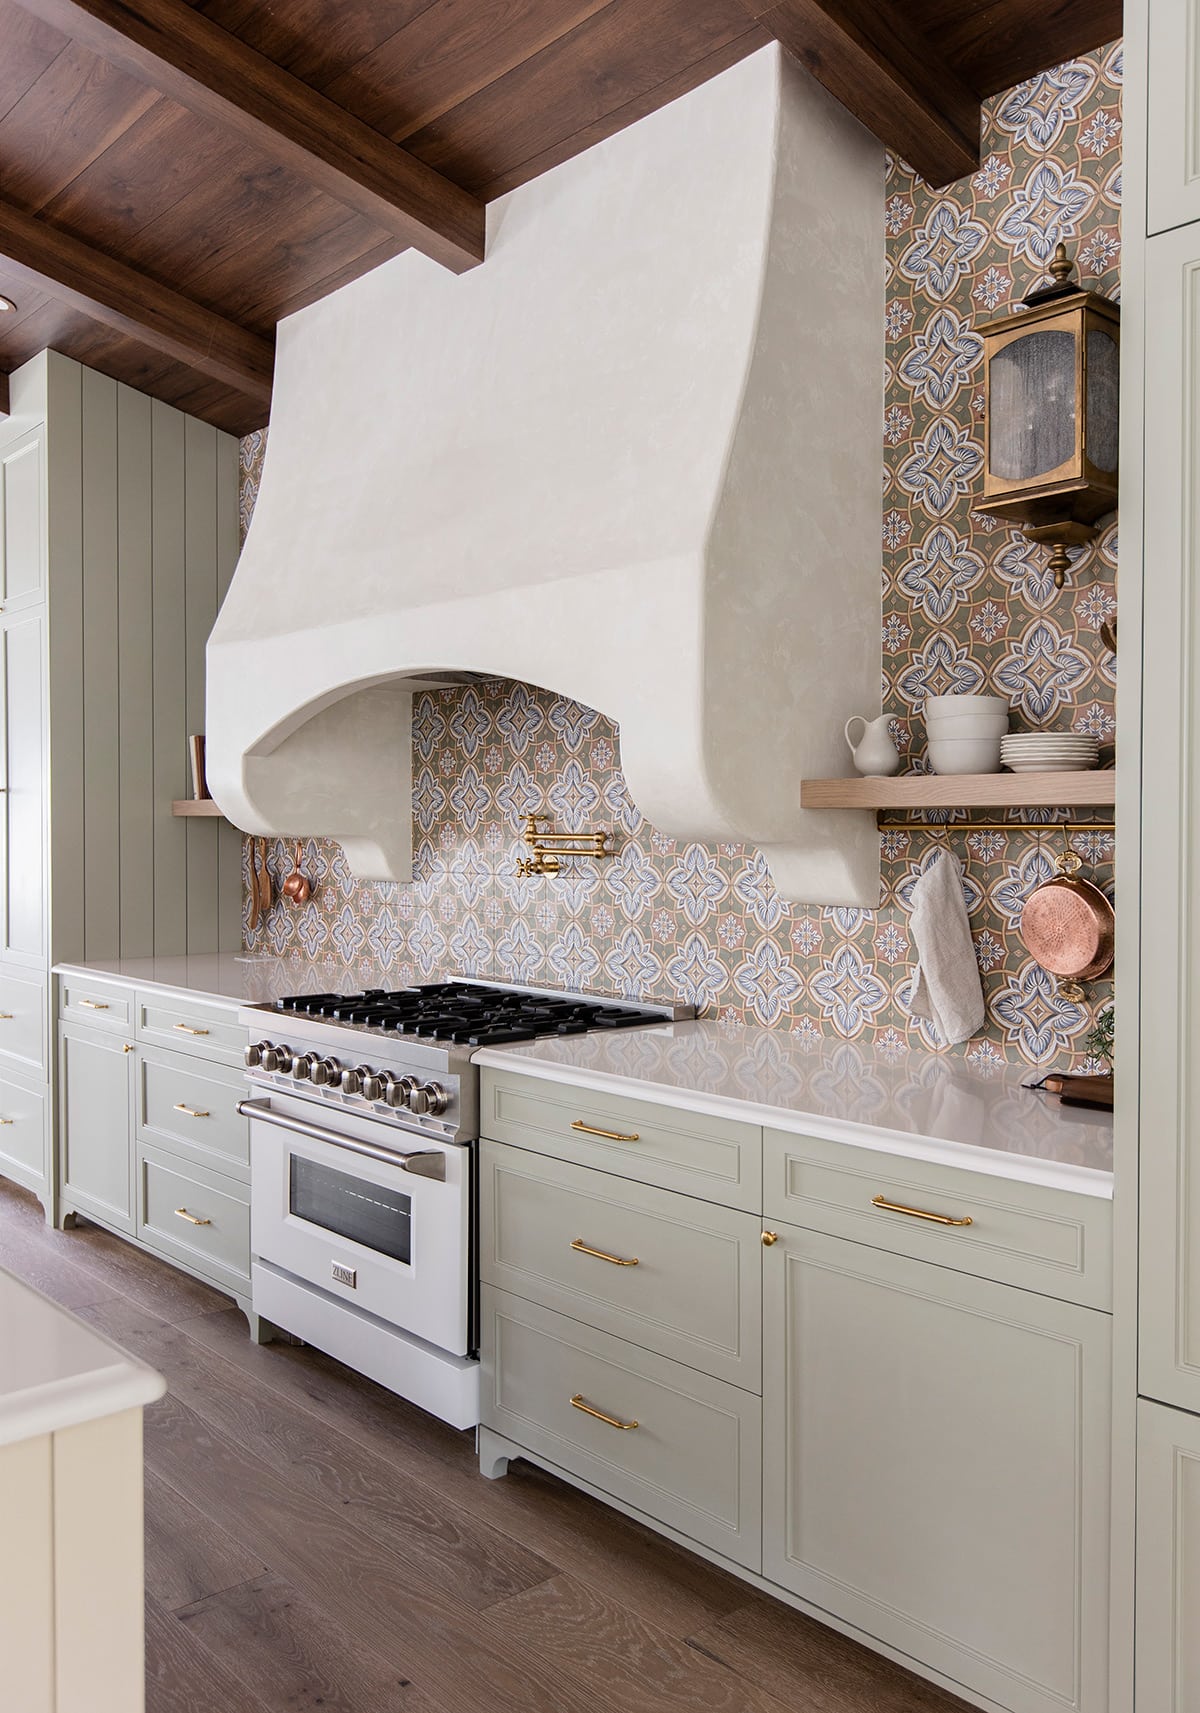 10 Simple Ideas to Update your Kitchen Cabinets - Jenna Sue Design